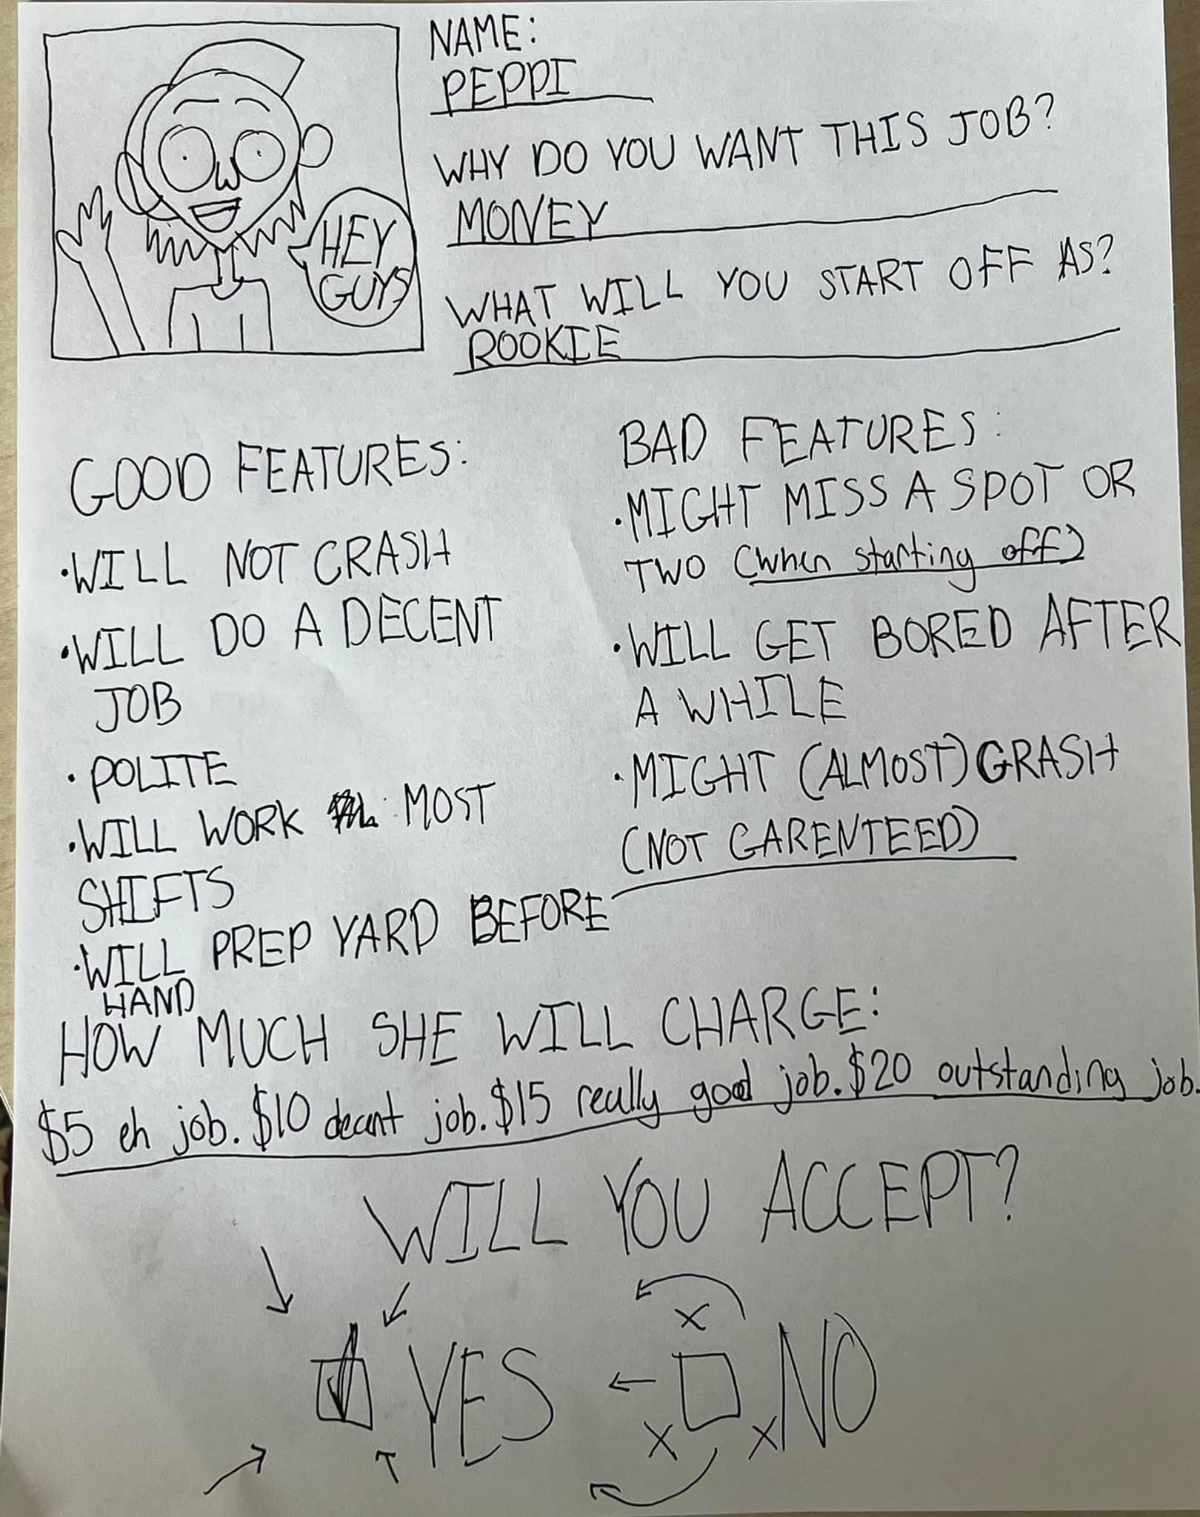 Friend's daughter made an application for a summer job mowing the lawn